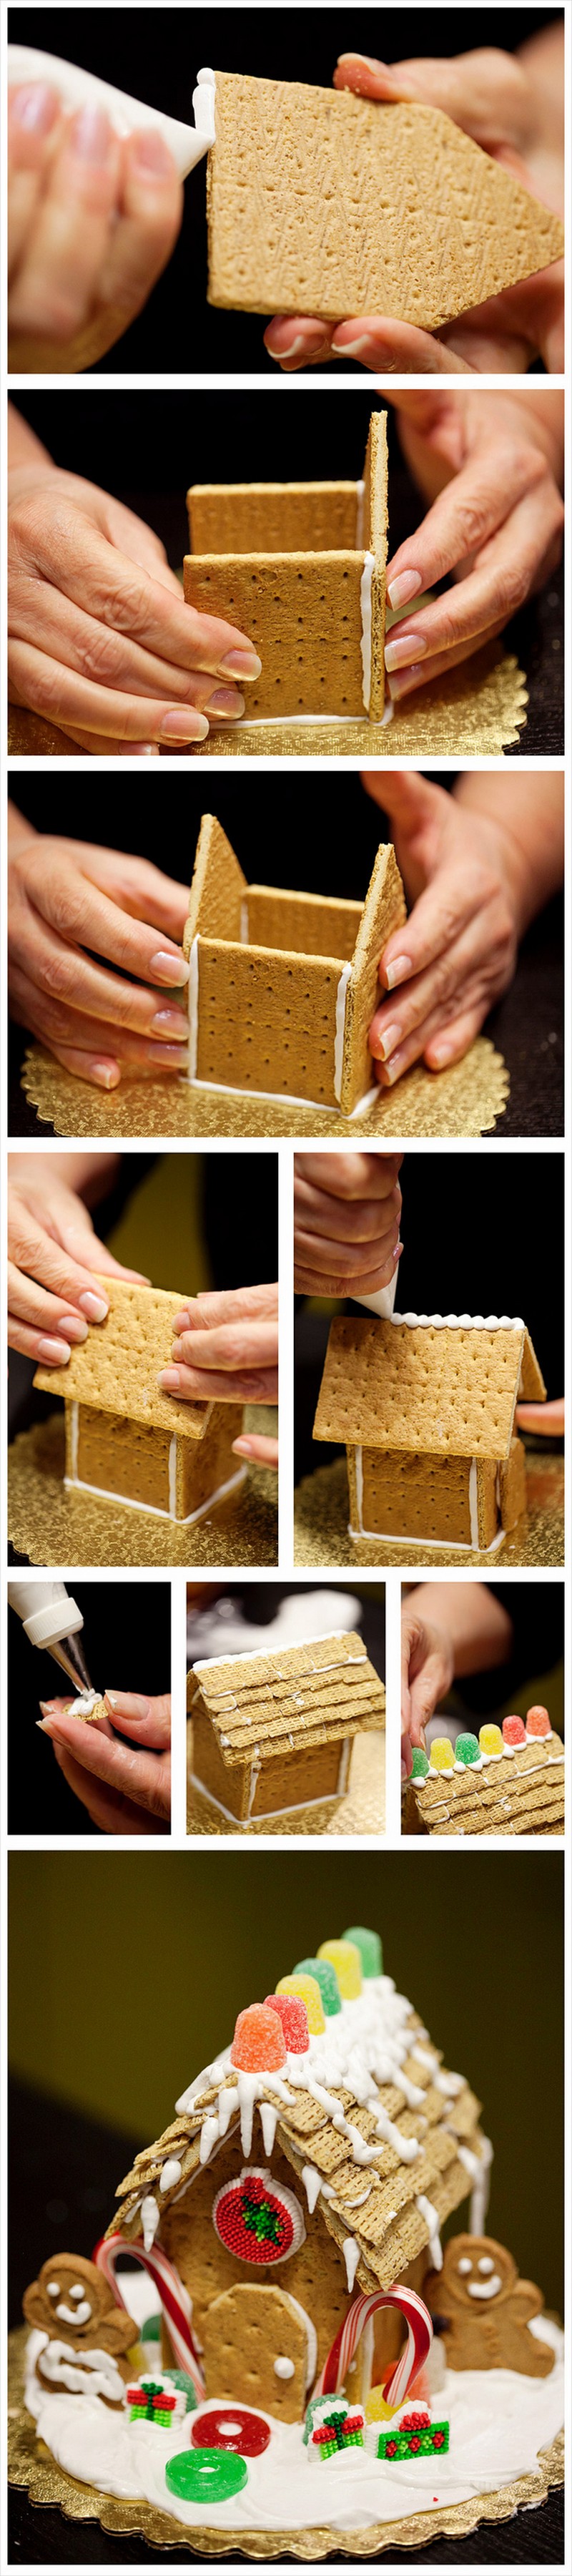 Build a gingerbread house with graham crackers